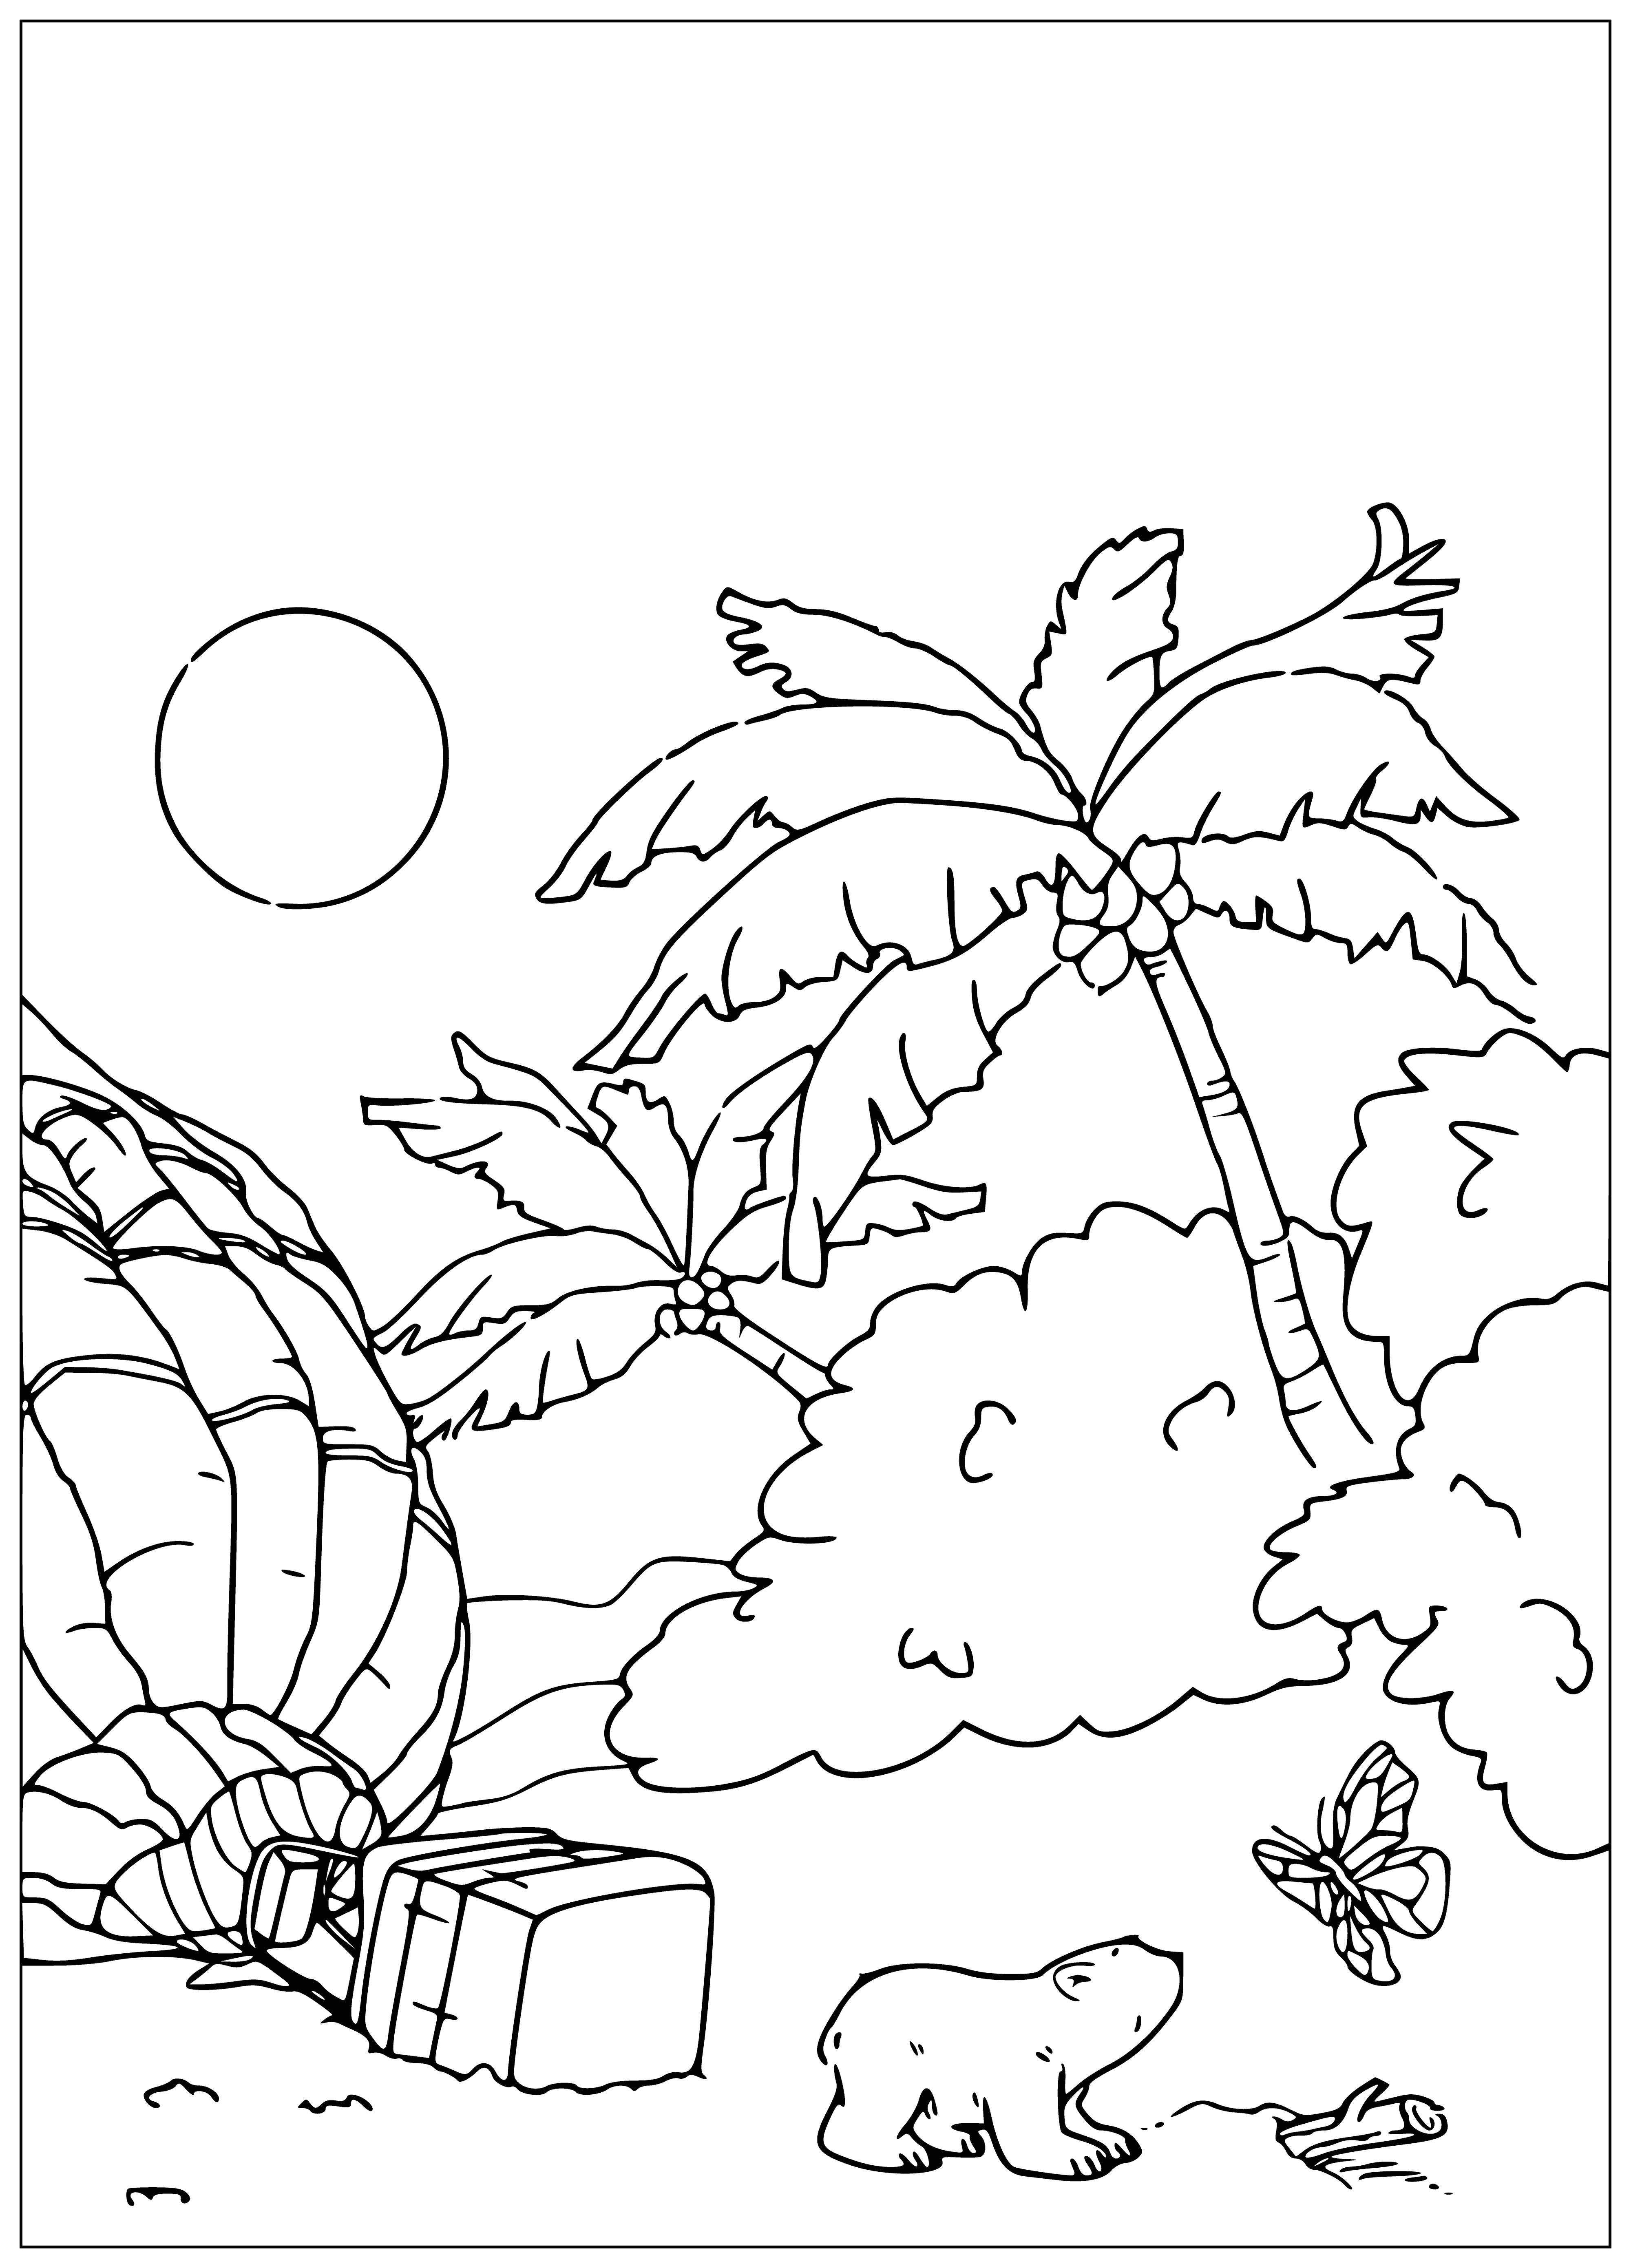 coloring page: Lars, the little polar bear, runs and frolics in a field of snow at sunset, his big ears and curious expression perked up in awe.